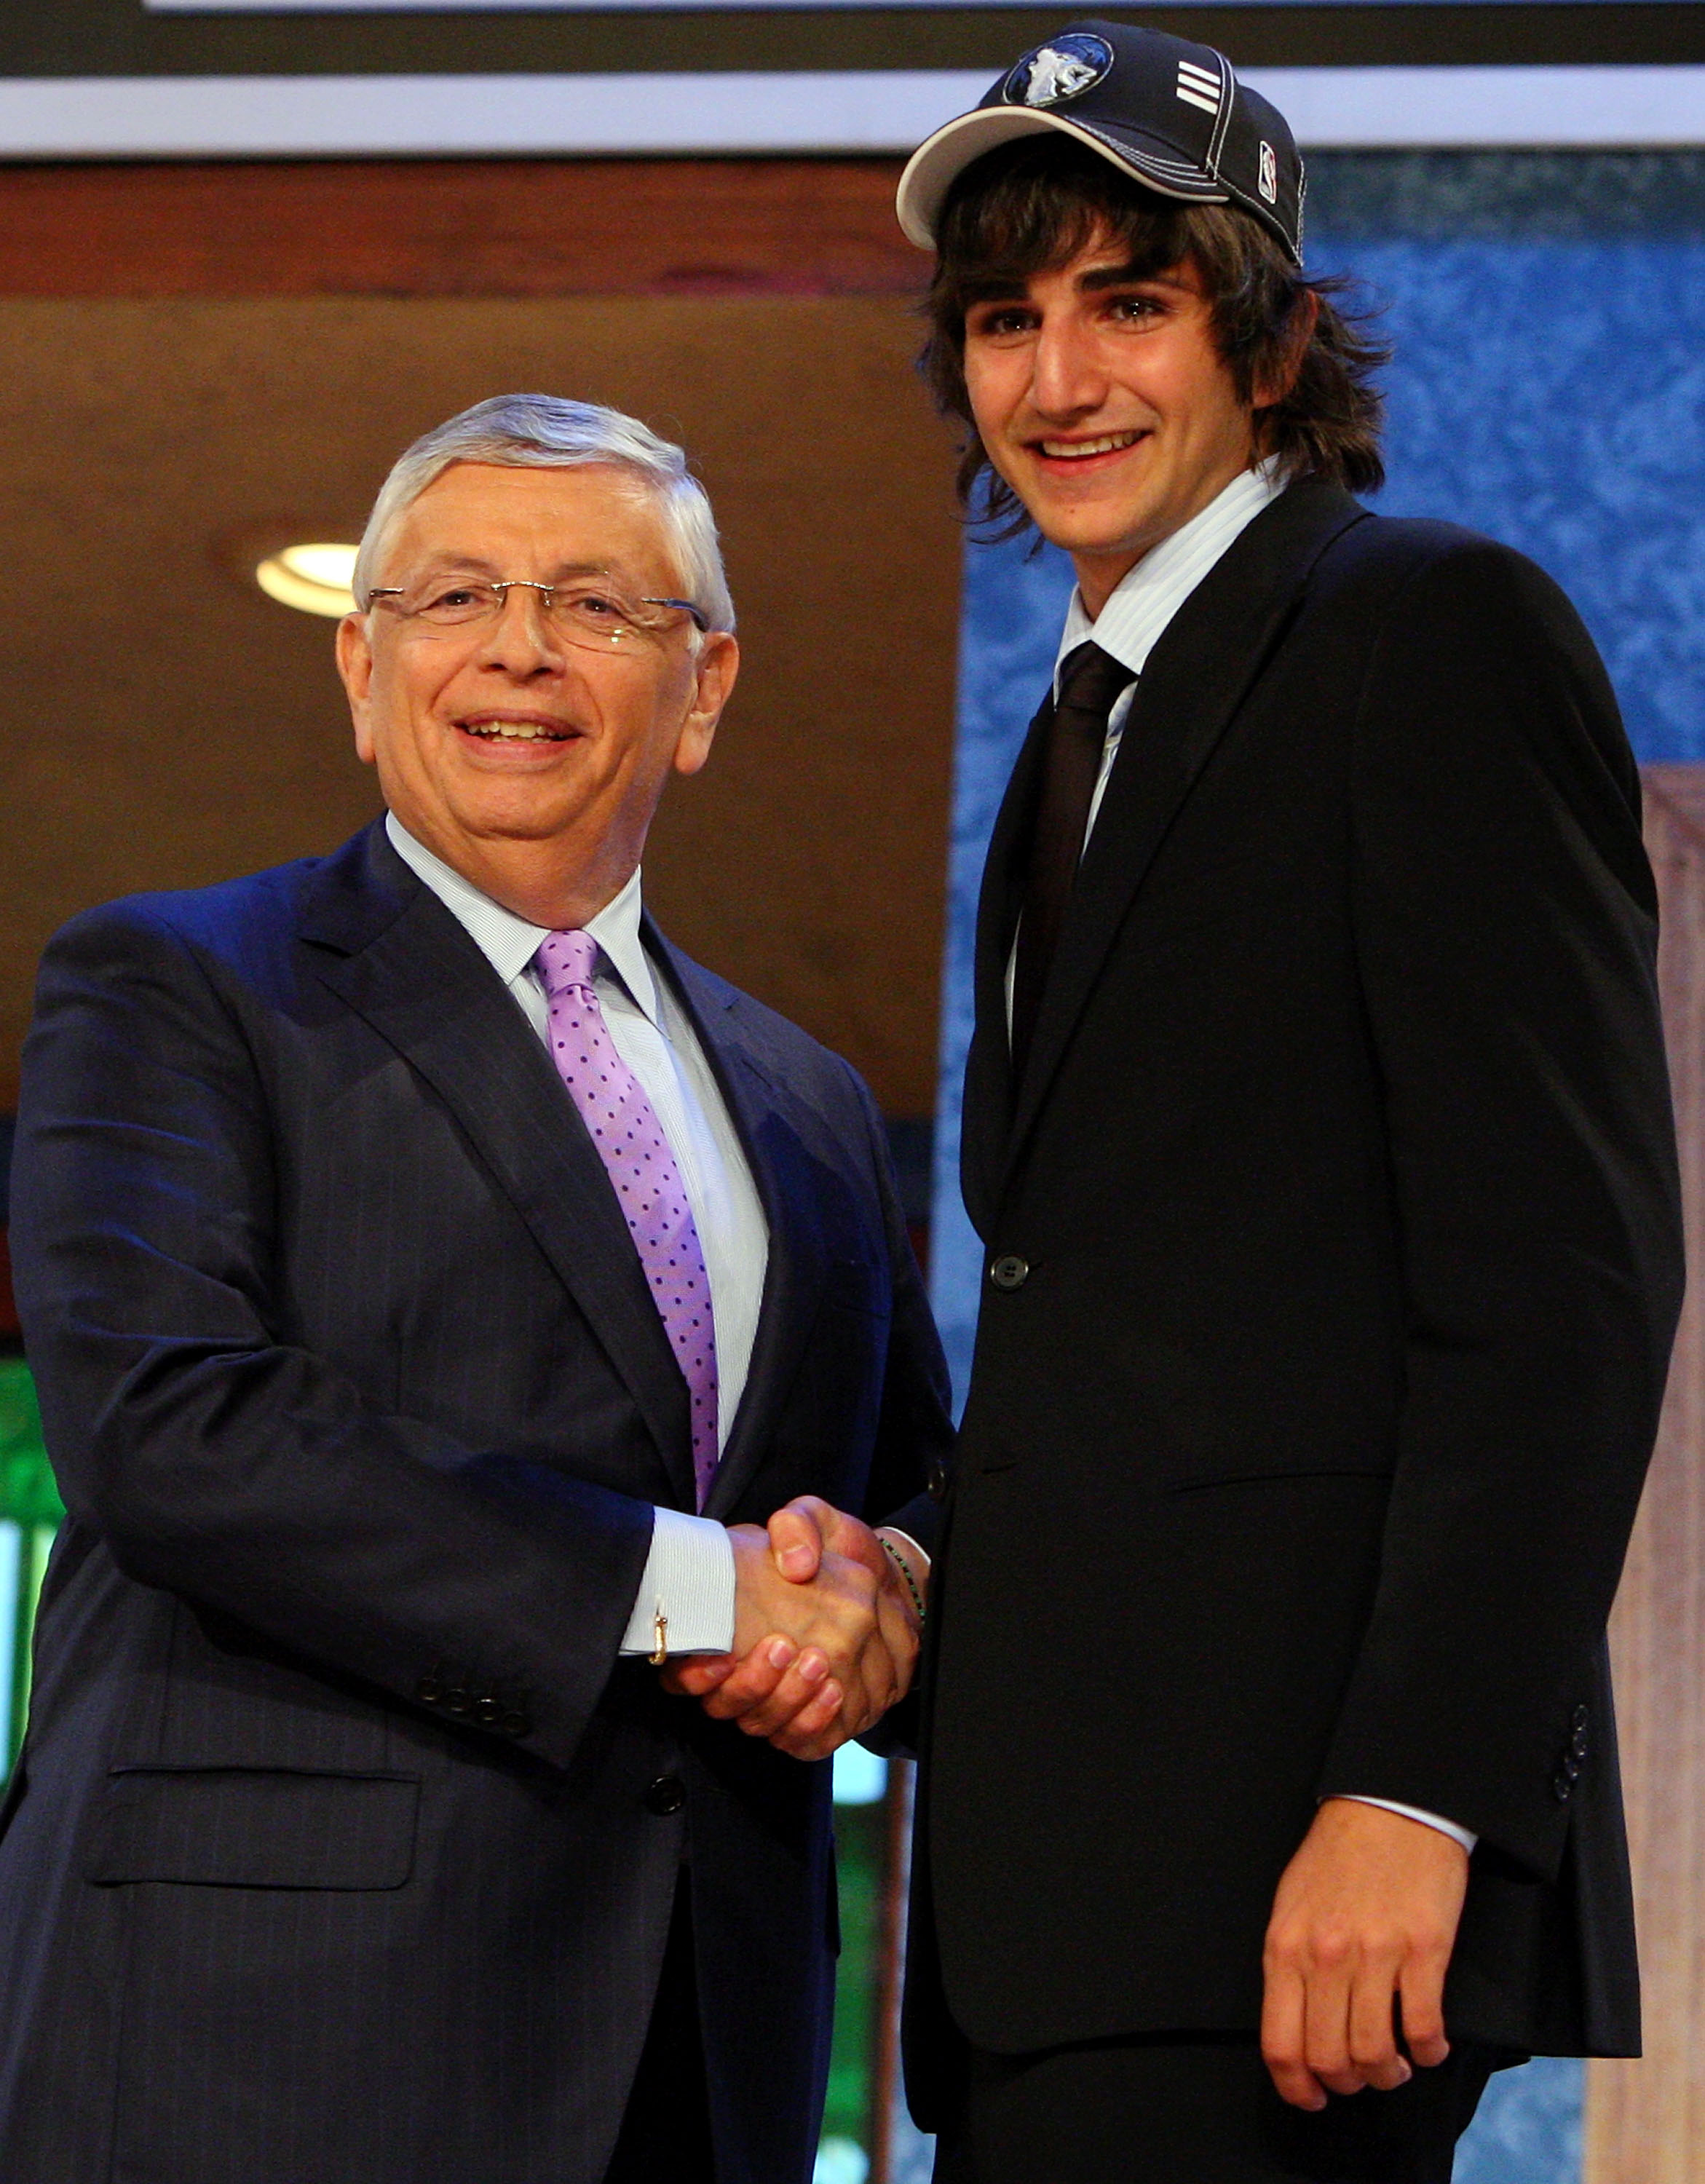 NEW YORK - JUNE 25:  NBA Commissioner David Stern poses for a photograph with the fifth overall draft pick by the Minnesota Timberwolves,  Ricky Rubio during the 2009 NBA Draft at the Wamu Theatre at Madison Square Garden June 25, 2009 in New York City. N